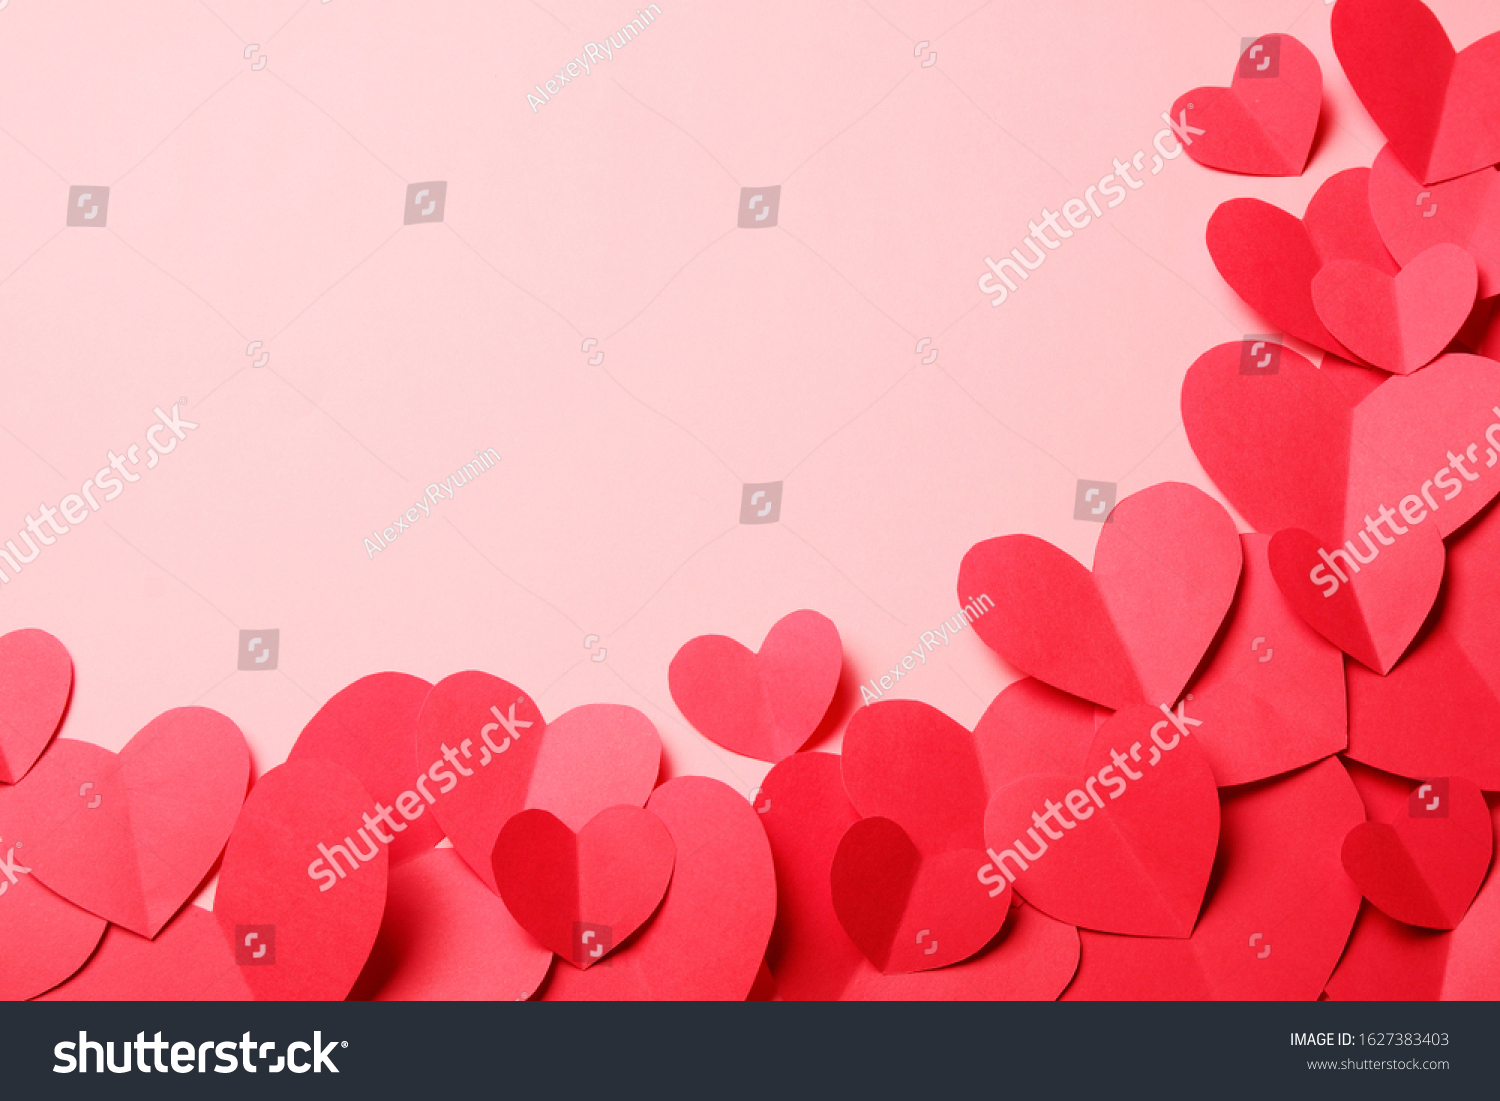 Cut out of red paper hearts on pink background. Good Valentines day, Womans day, love, romantic or wedding composition with copy space for your text for banner, congratulation, card, offer, flyer, advertising, invitation.